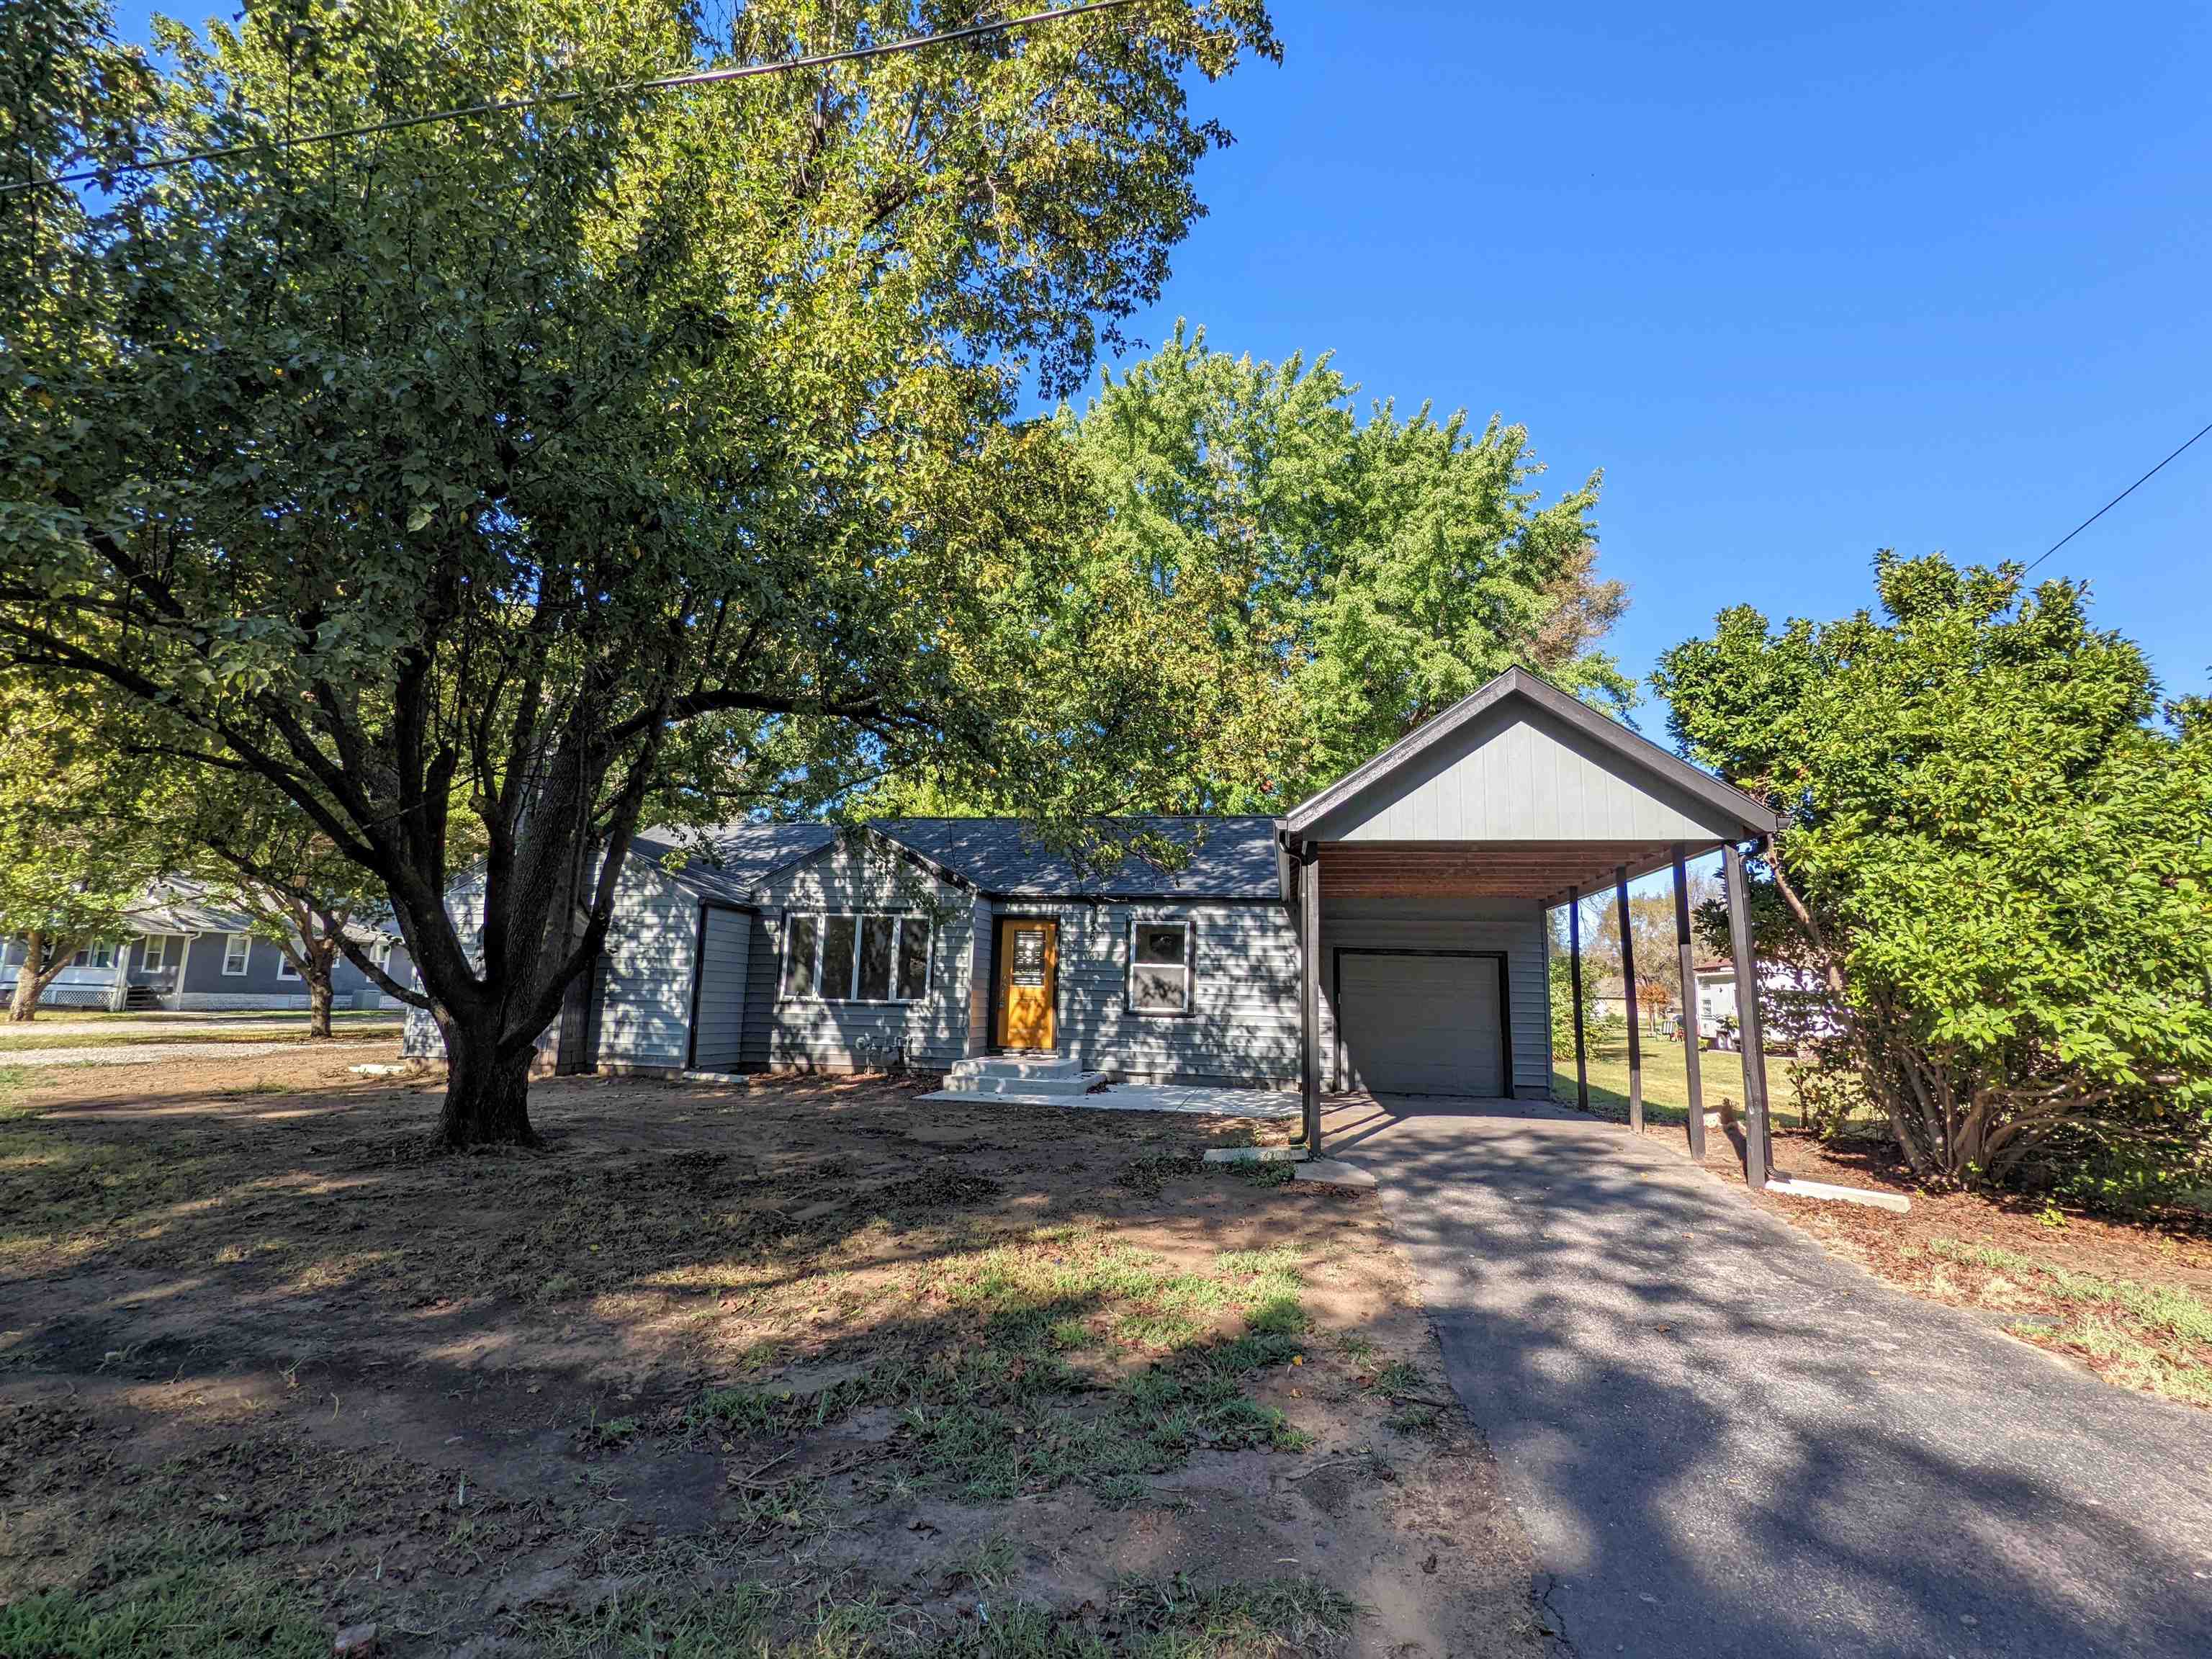 Nestled in a quiet area of Wichita on approximately 1/2 acre, this 3BR, 2 BA ranch home features lar